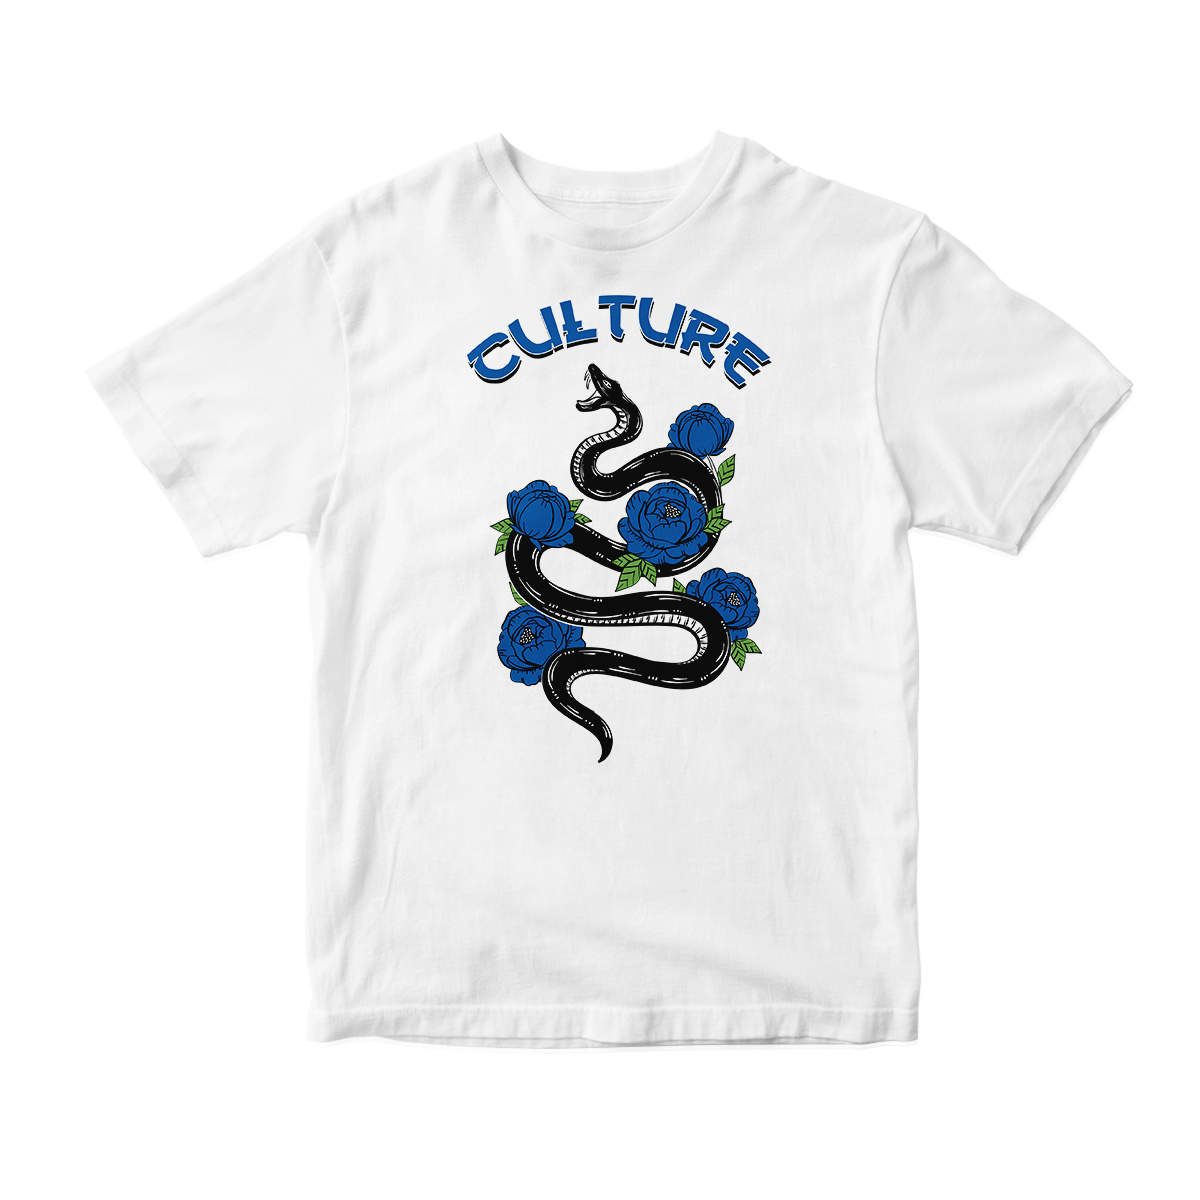 'Culture Snake' in Game Royal CW Unisex Short Sleeve Tee